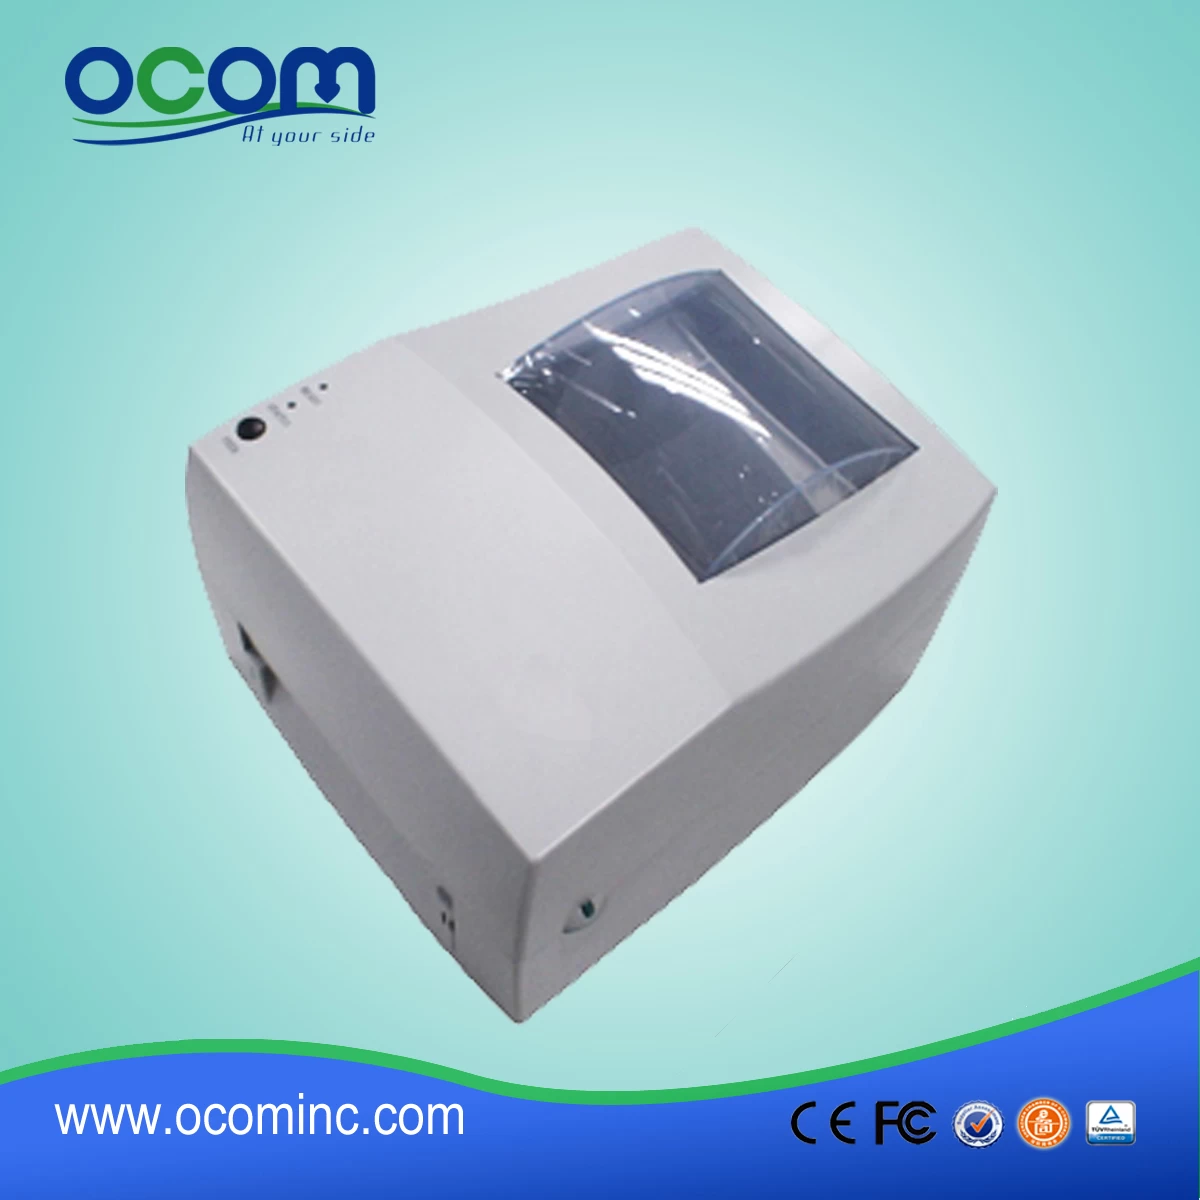 China Factory Thermal Transfer and Direct Thermal Barcode Label Printer with Software Provided